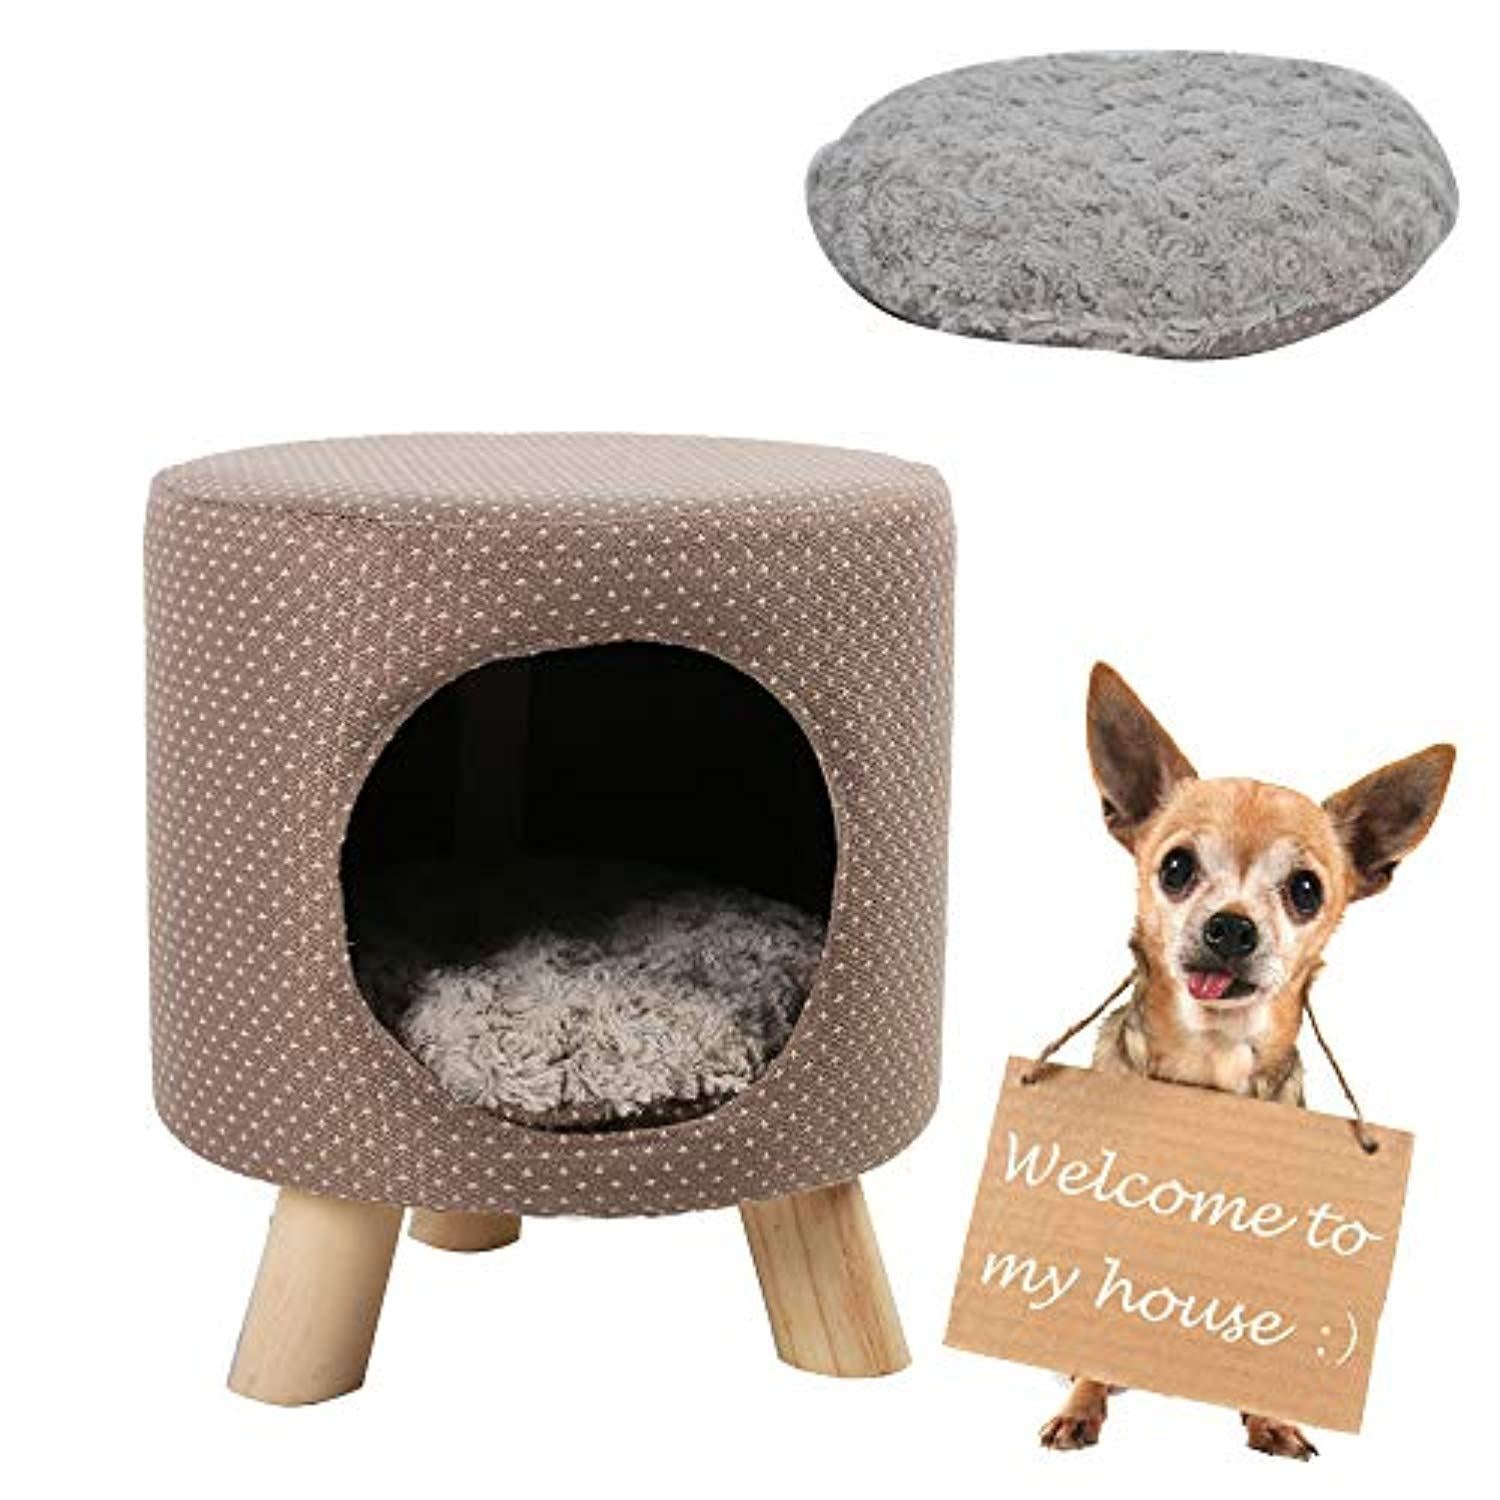 Bosonshop Pet Cat Dog House Kitten Puppy Nest Bed Kennel with Soft Comfort Cushion, Easy to Assemble